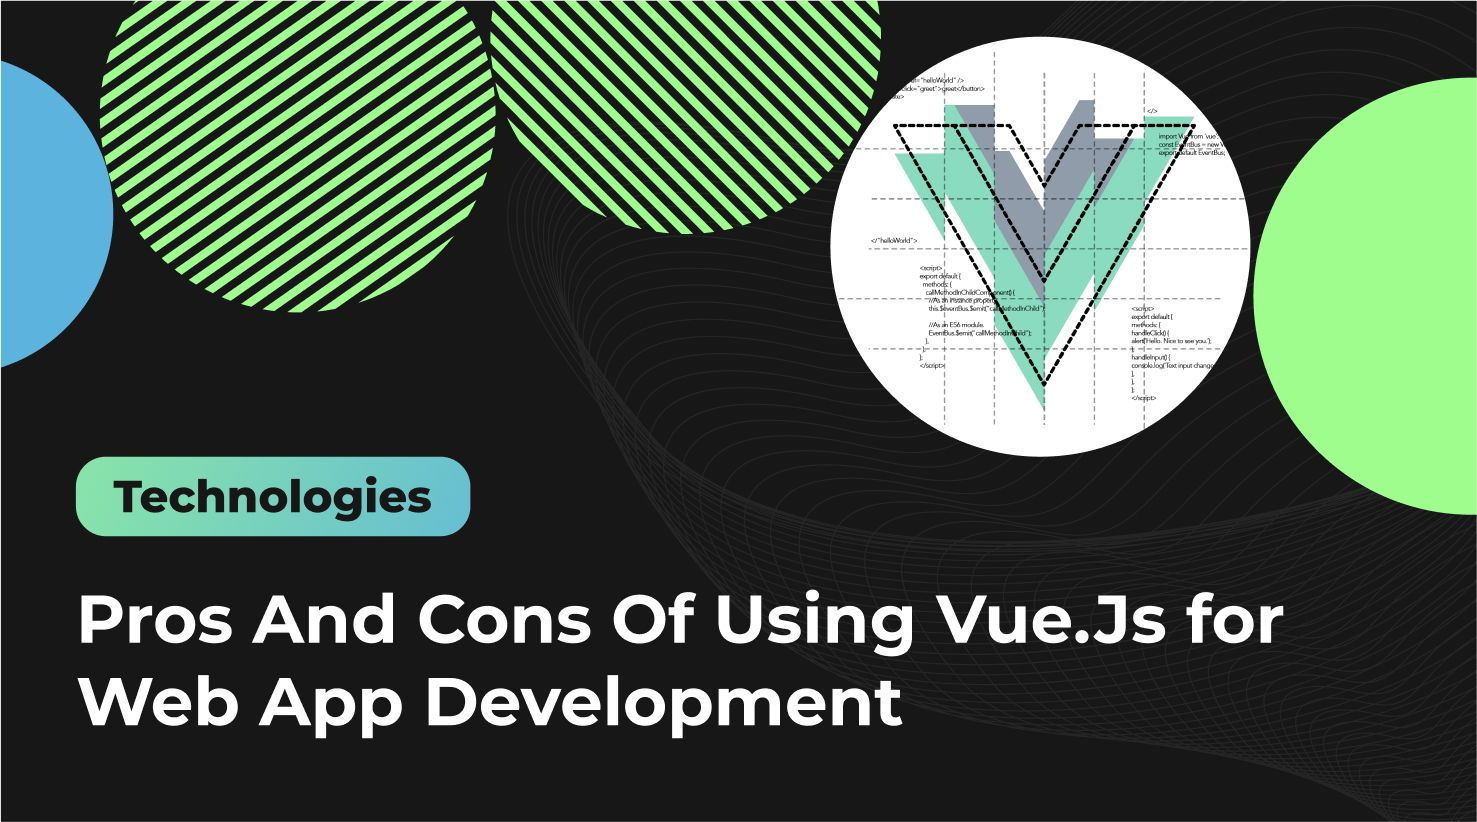 Pros And Cons Of Using Vue.Js for Web App Development